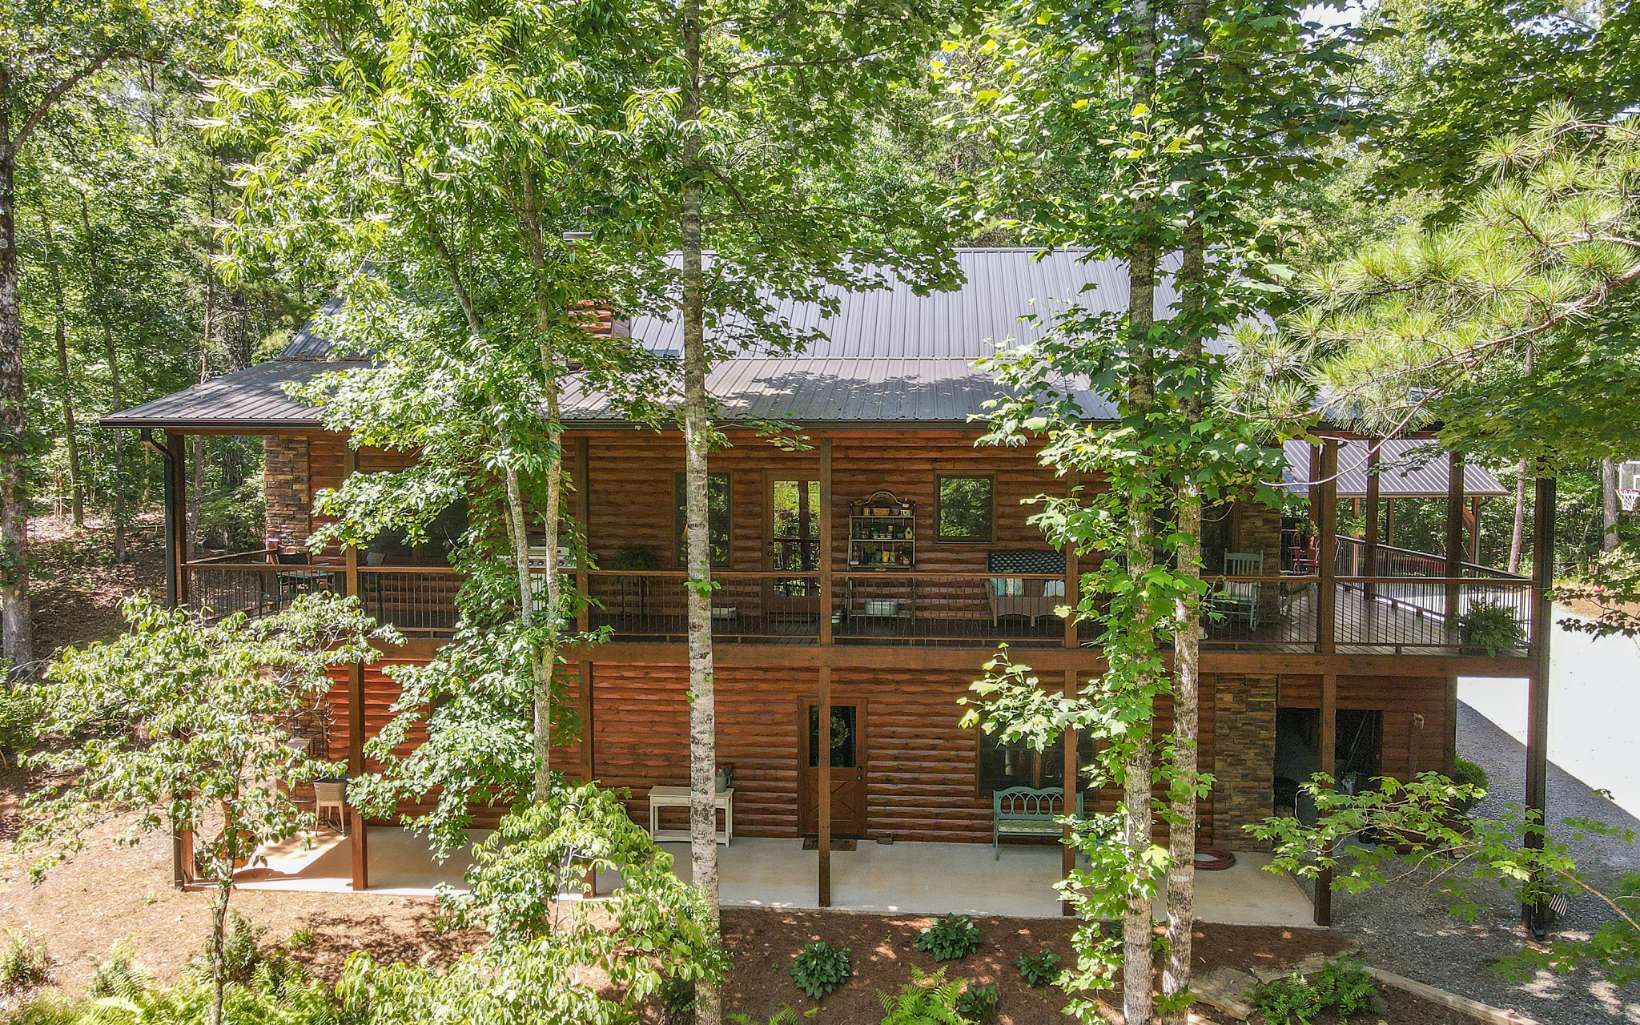 Have you been dreaming of a private and peaceful life in the North Ga Mountains? This immaculate 3/3 cabin located less than 2 miles from the popular town of Blue Ridge is calling your name! A beautiful gated community that allows Toccoa River access and pavilion area for all residents to enjoy true mountain living! The highly desired Master and Laundry on the main floor plan flows beautifully and is a nice open concept while also providing a separate dining area. You will enjoy family, gaming and chilling time in the wide open basement area that also has a separate bedroom and bathroom. There is also a rare three car carport with a huge storage area above as well as a ton of storage in the cabin. Call to schedule your appointment to see this meticulously cared for, private cabin.